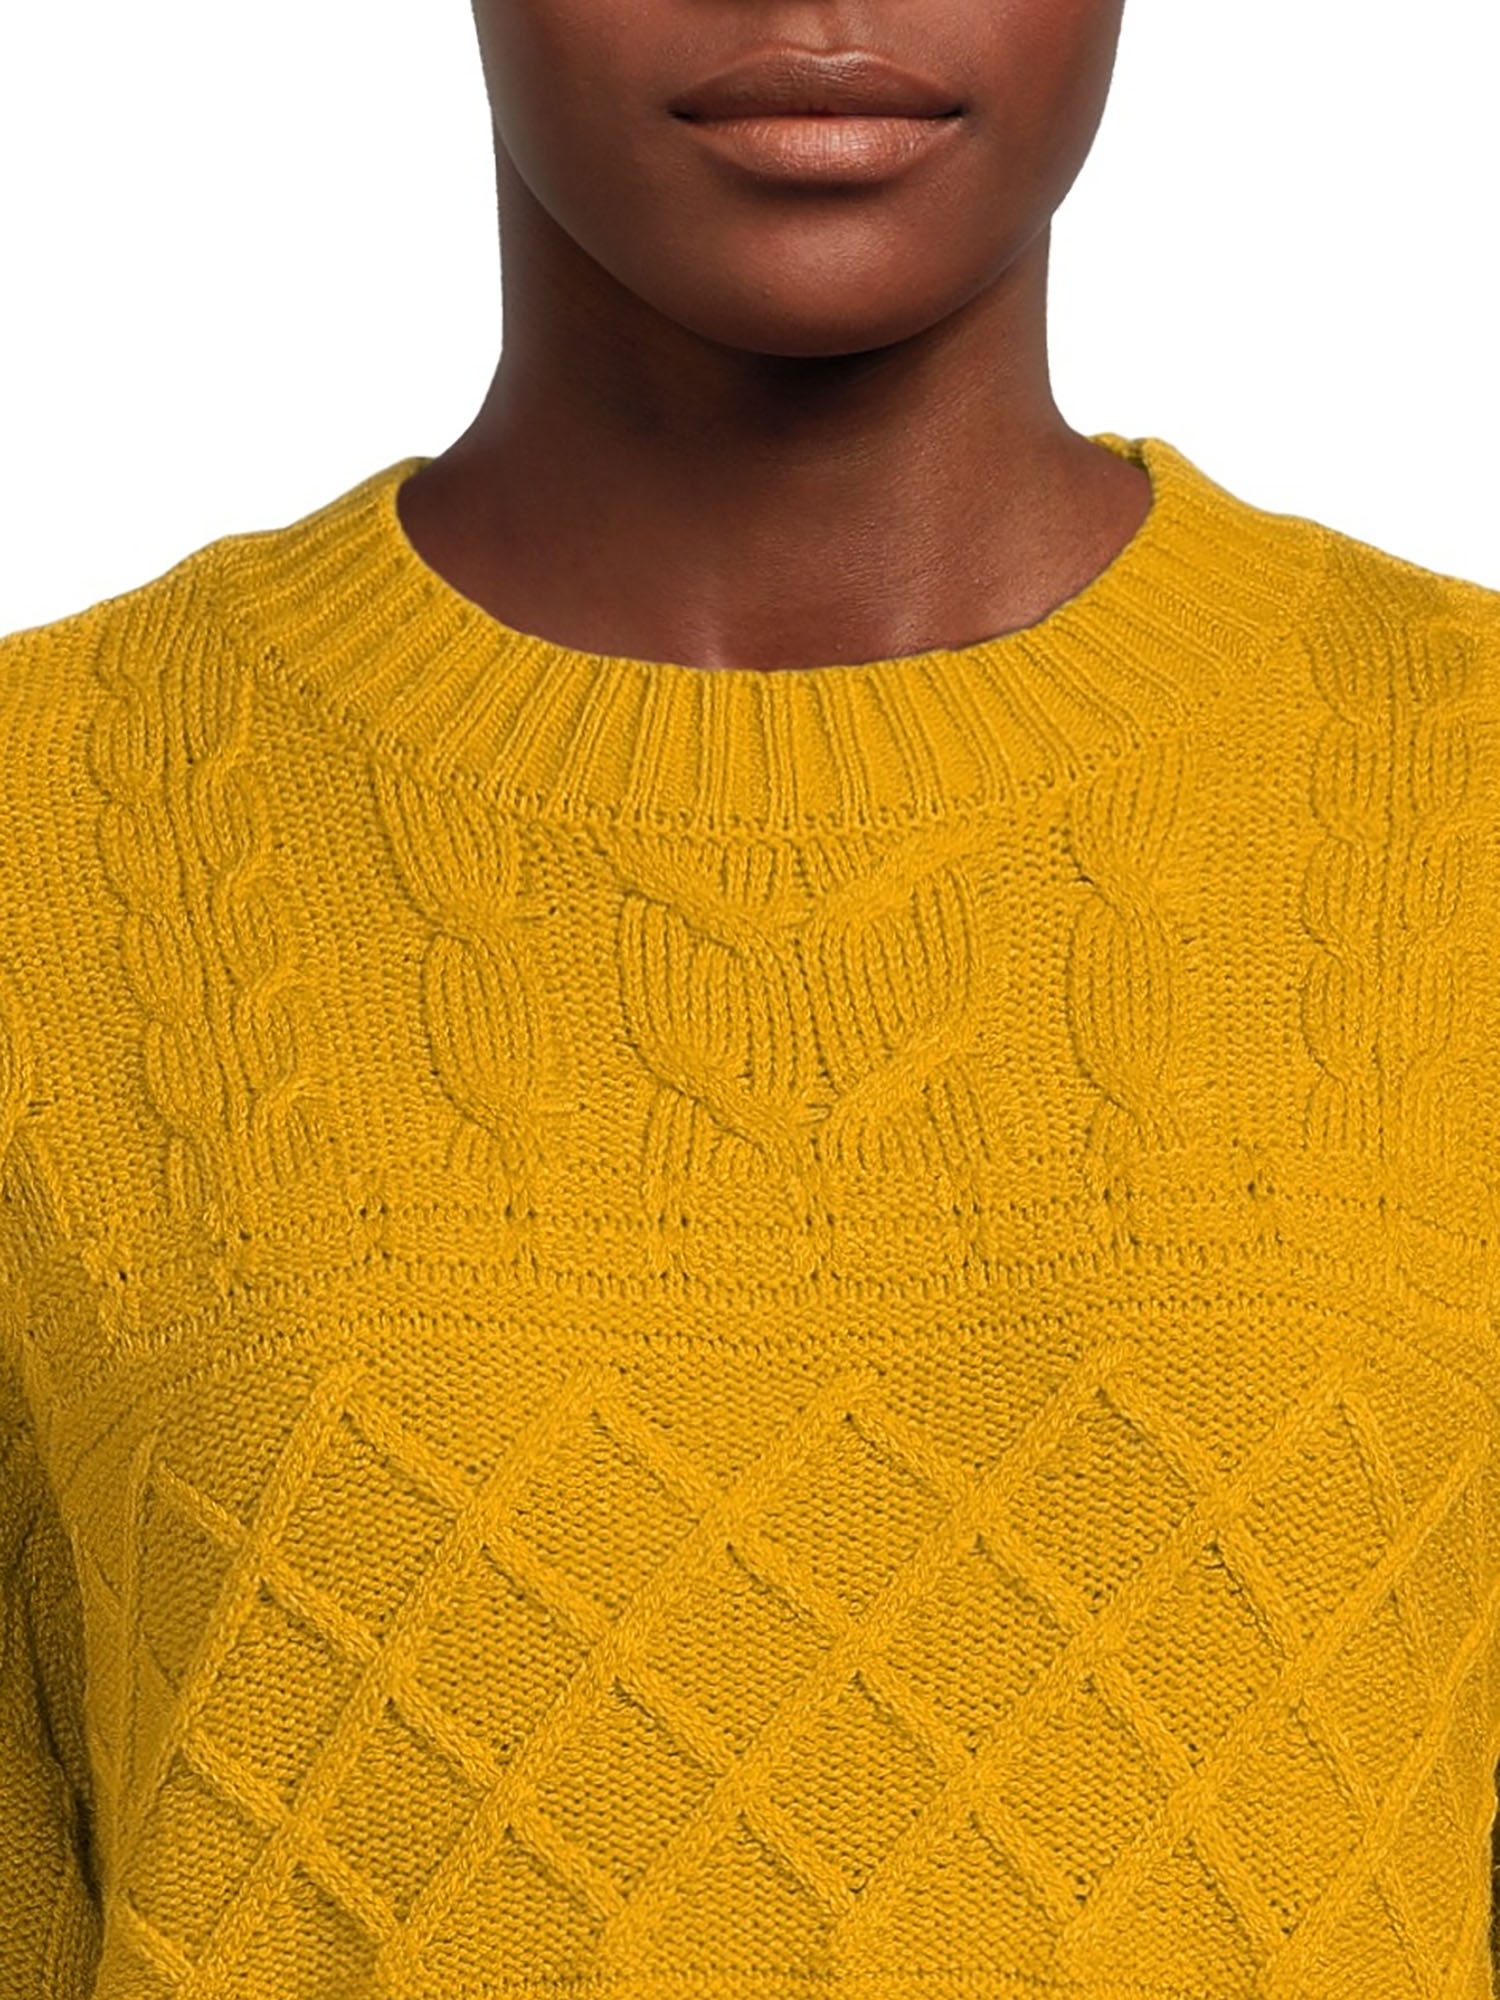 Time and Tru Women's Mixed Stitch Sweater - image 4 of 5